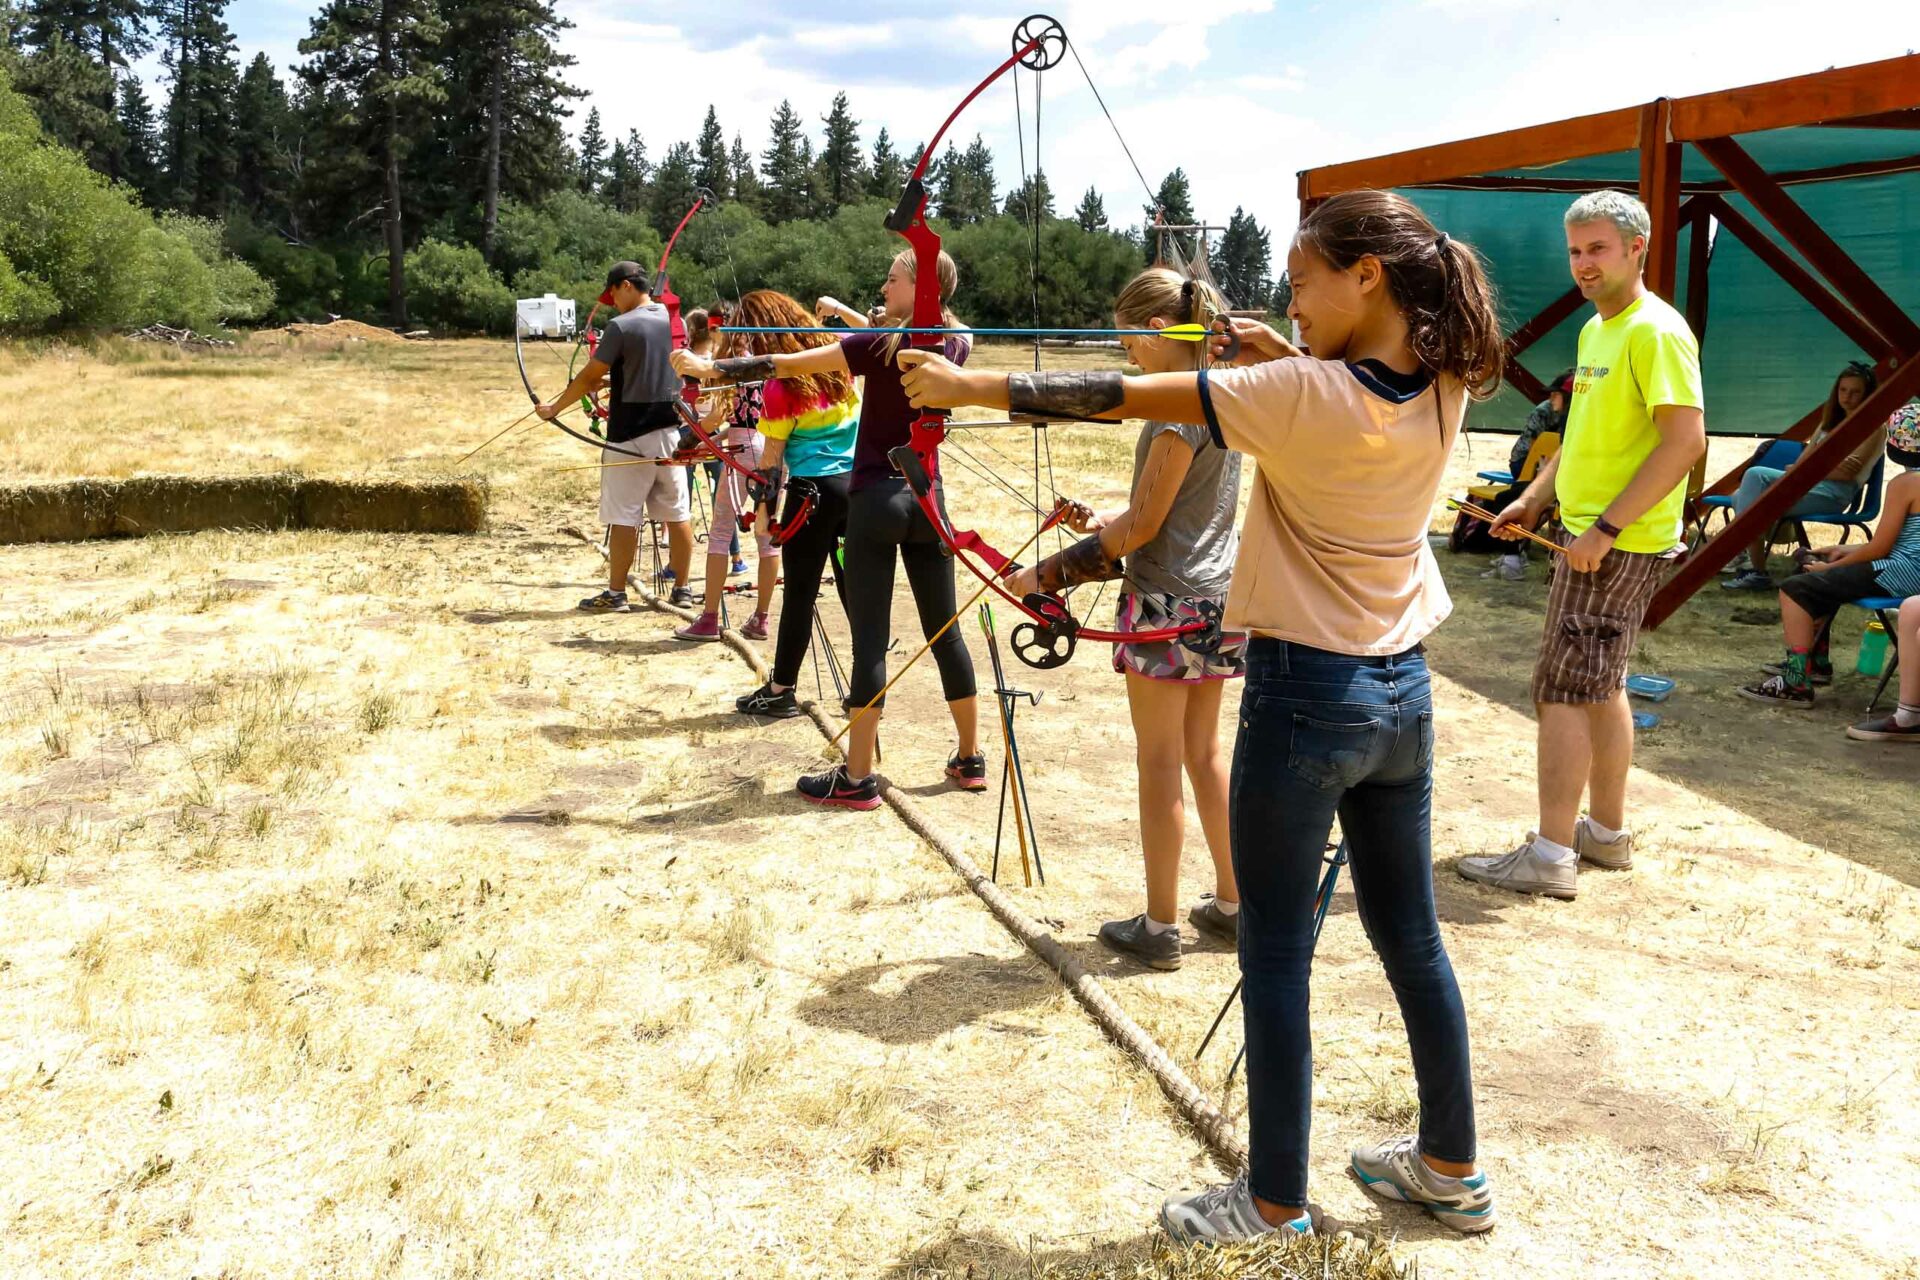 Kids shooting bows and arrows.